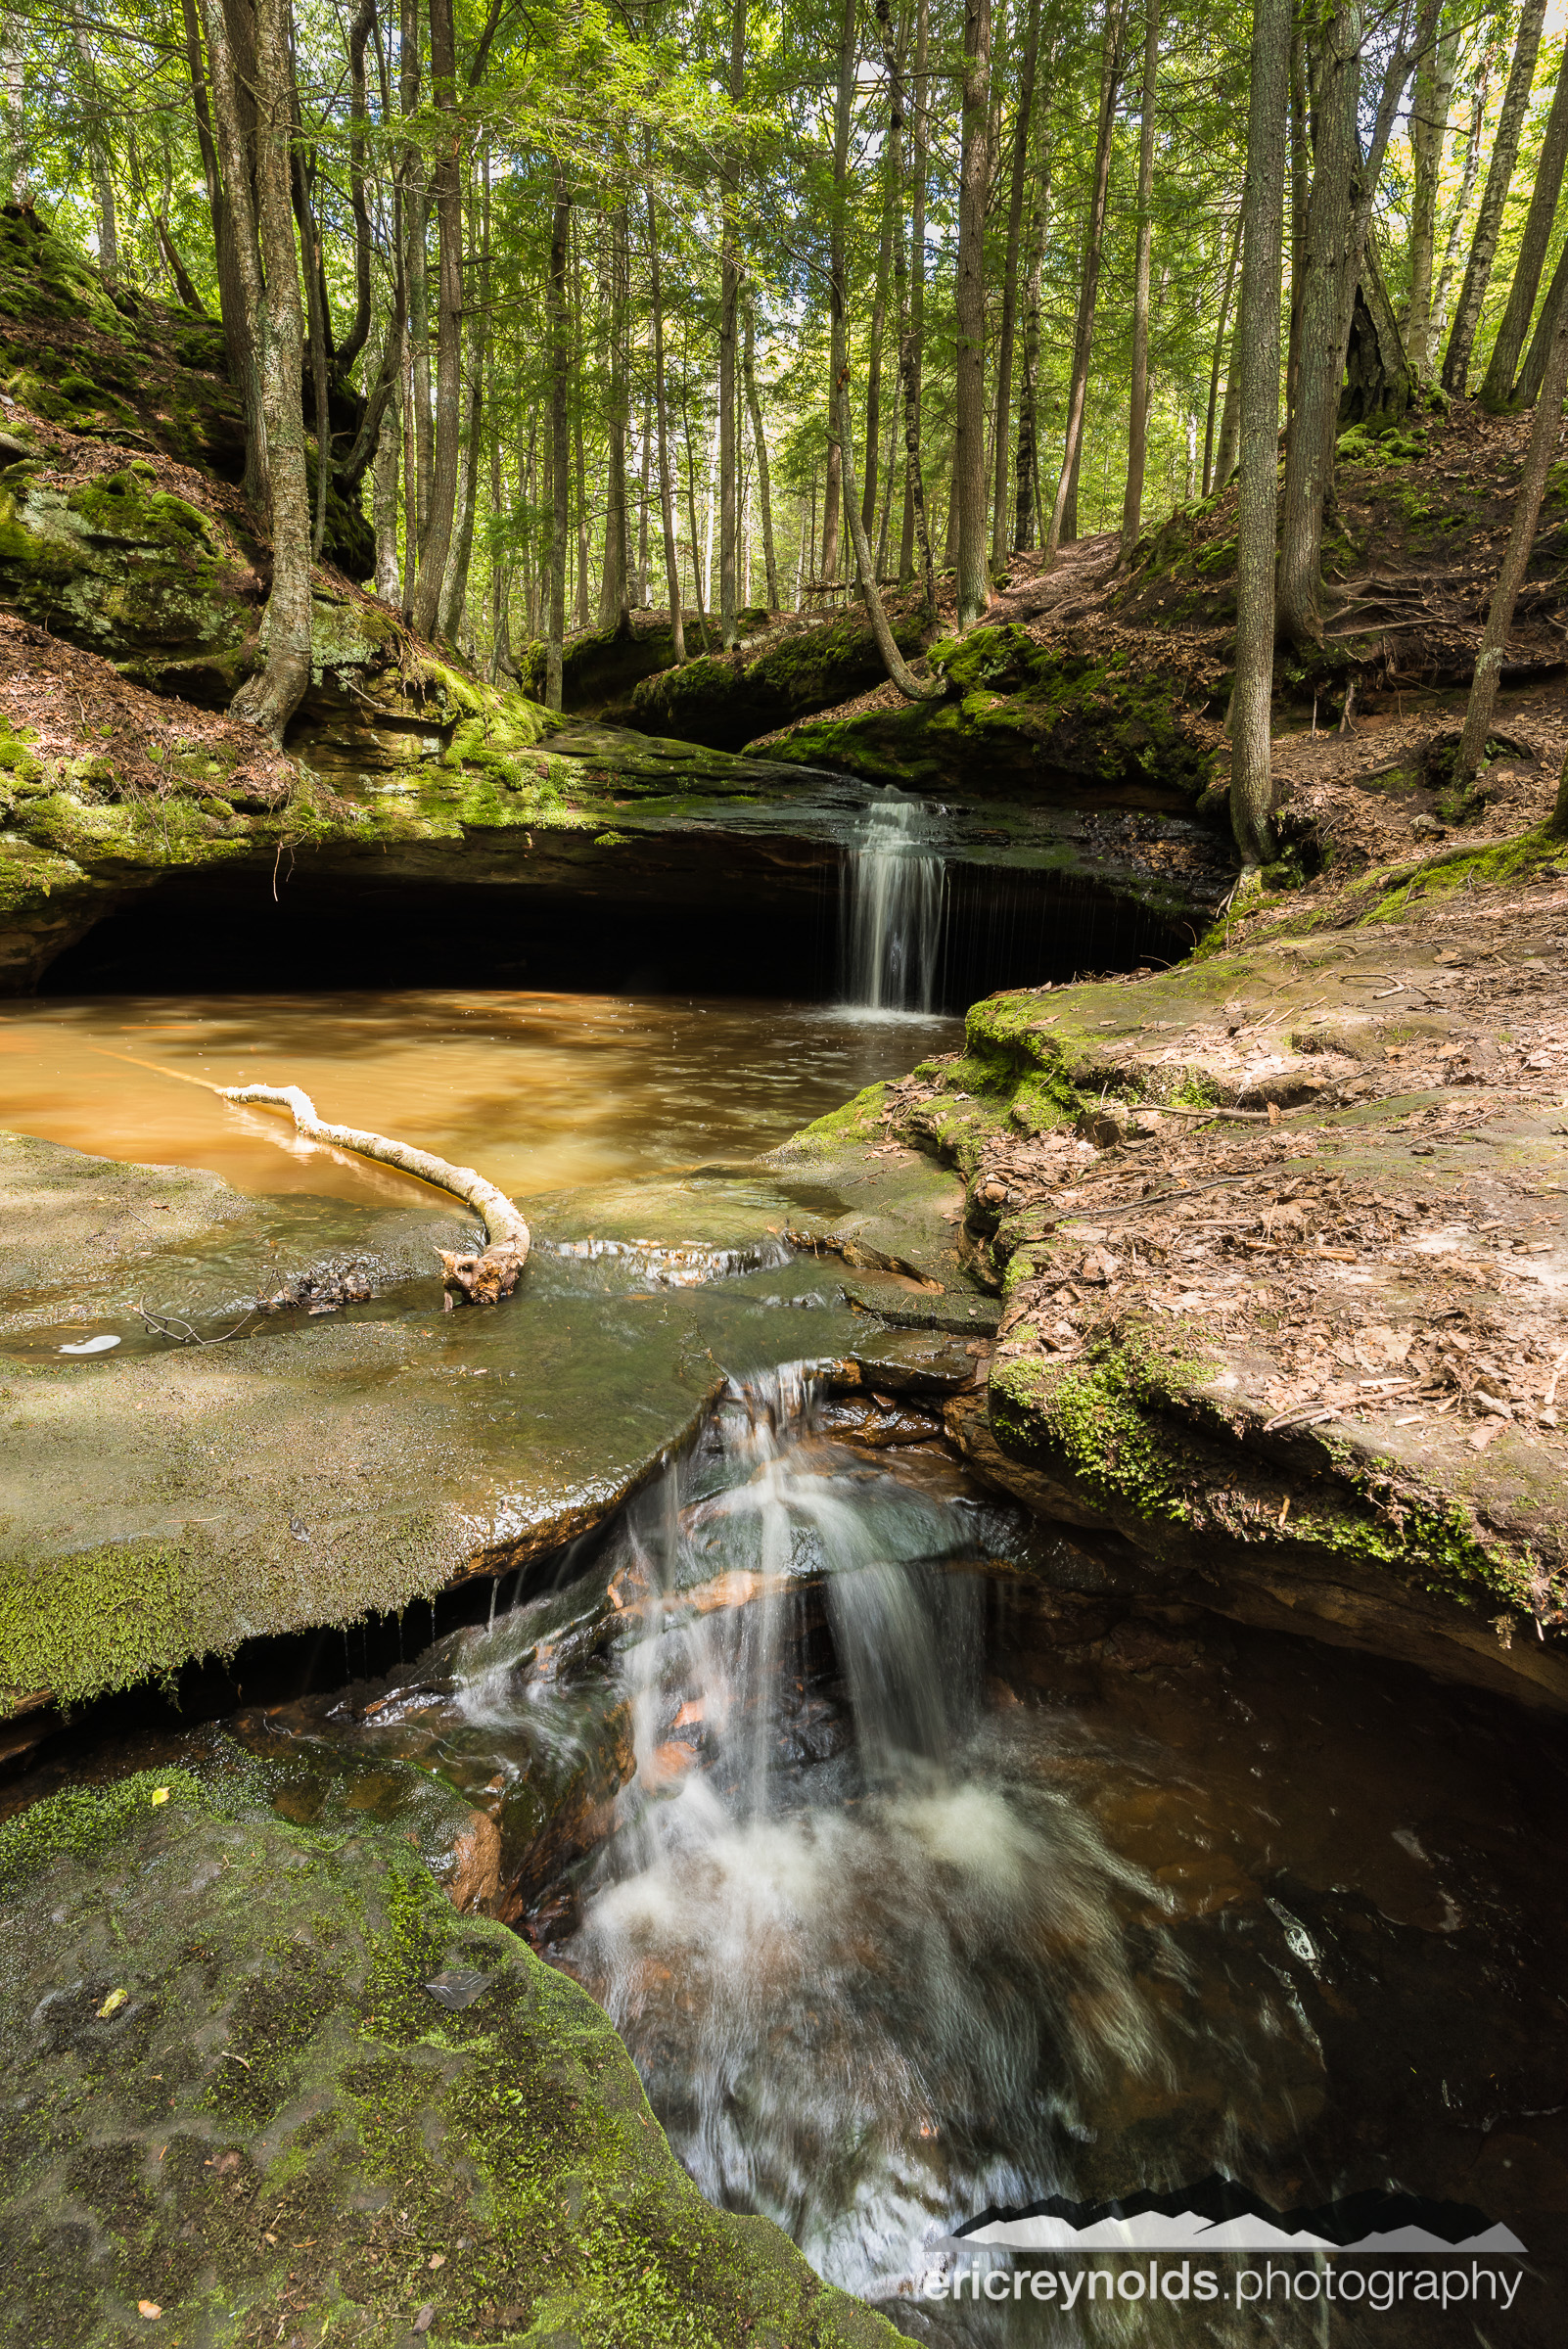 Small Waterfall in Echo Dells by Eric Reynolds - Landscape Photographer